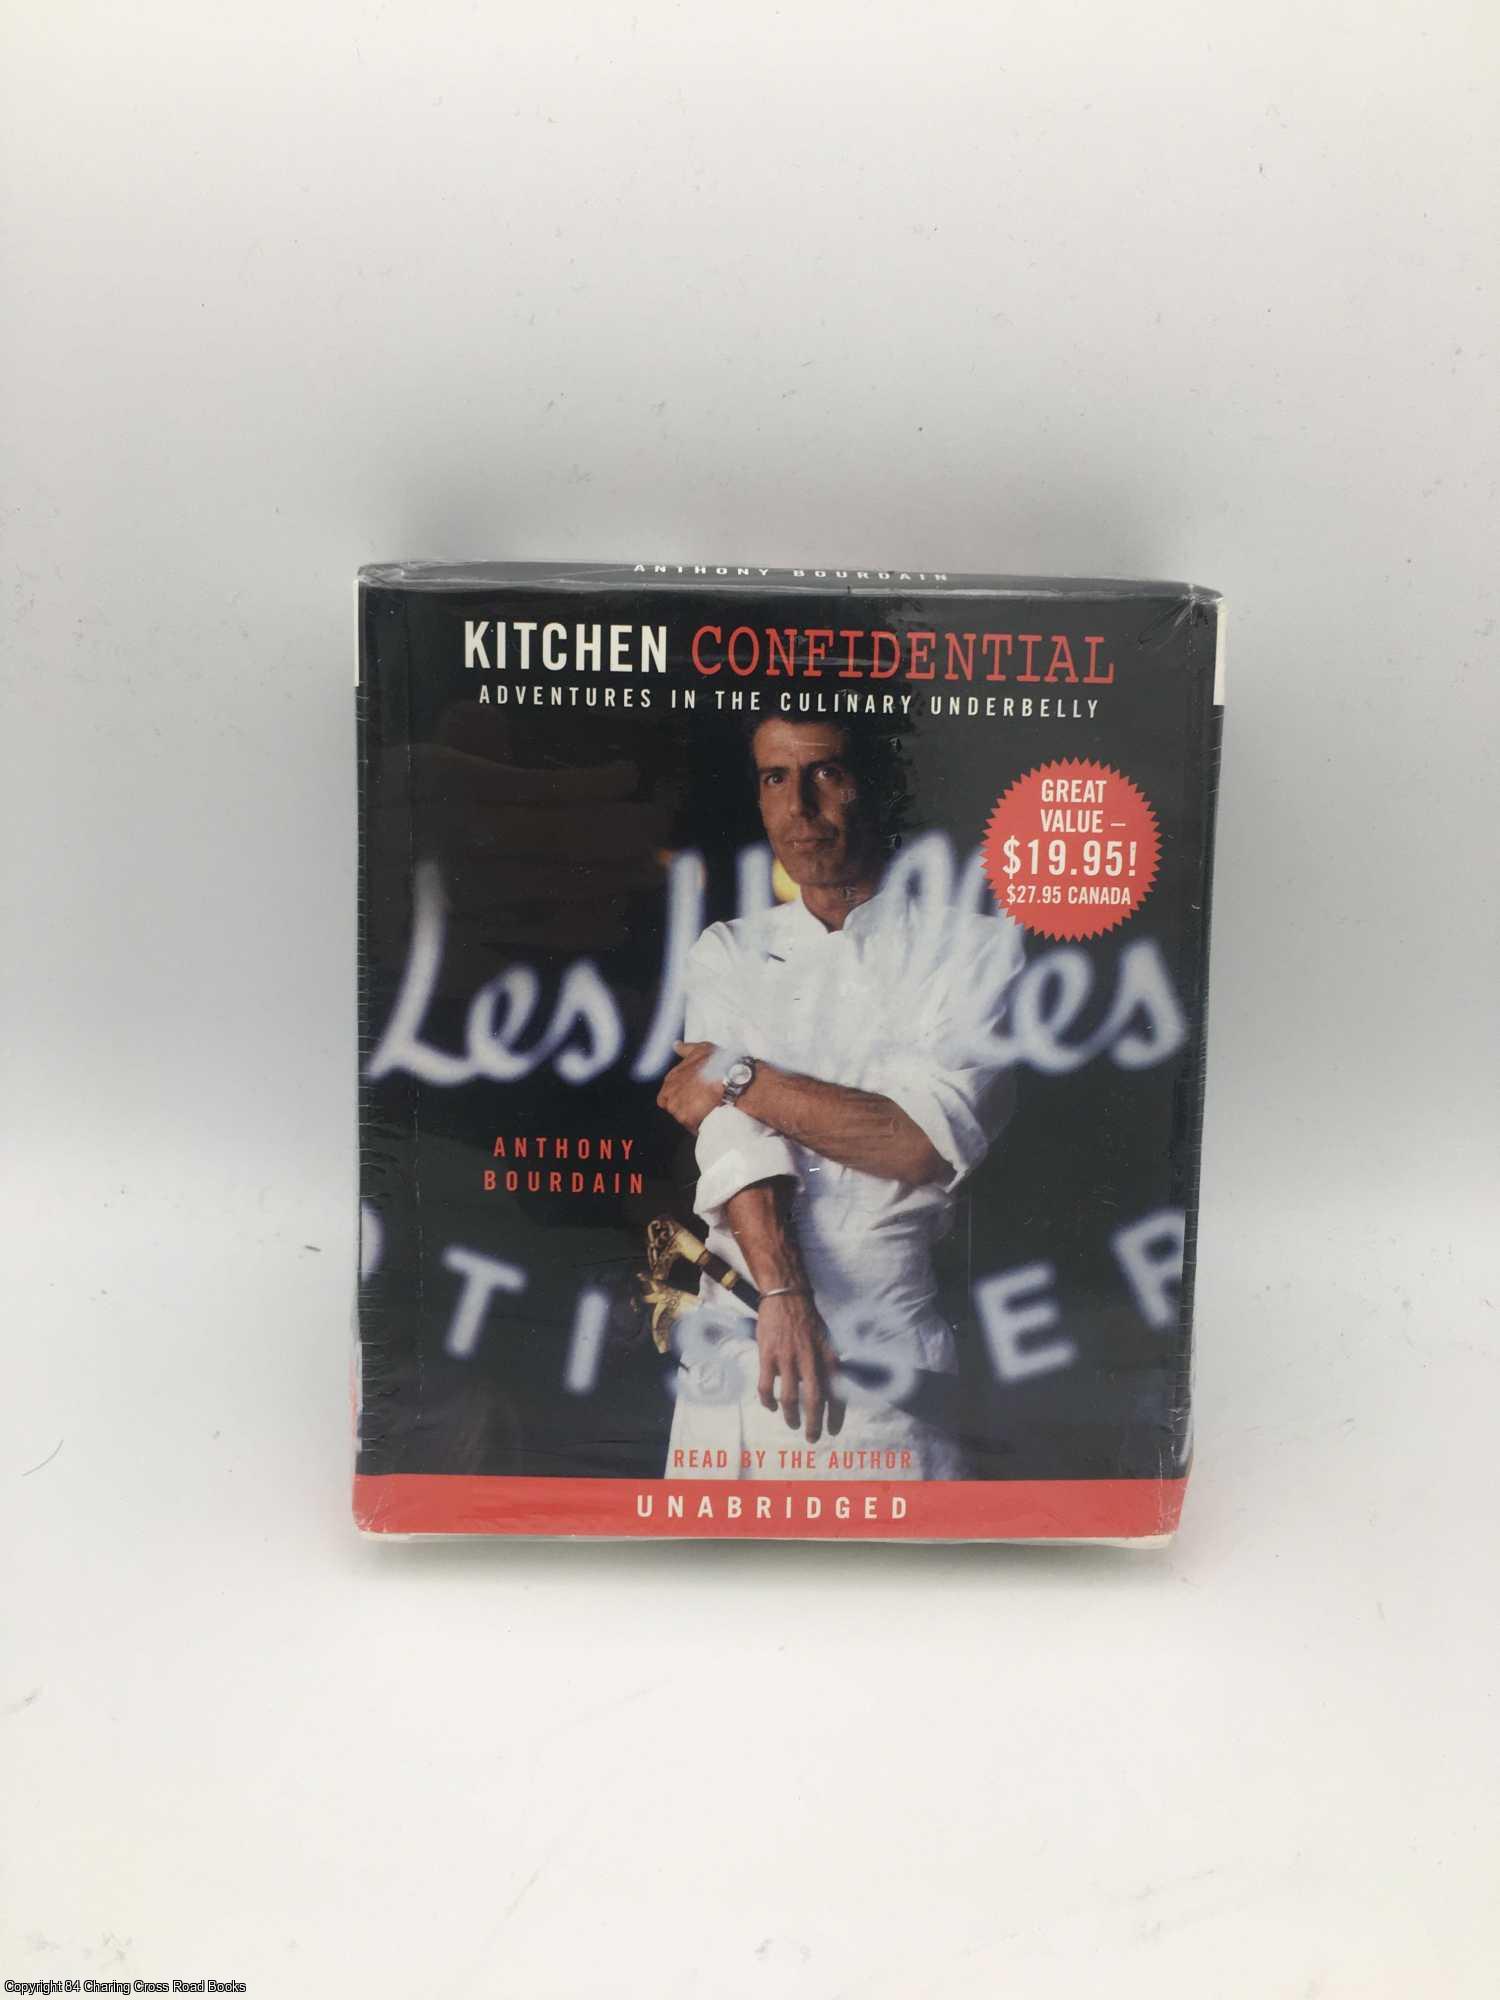 Bourdain, Anthony - Kitchen Confidential: Adventures in the Culinary Underbelly